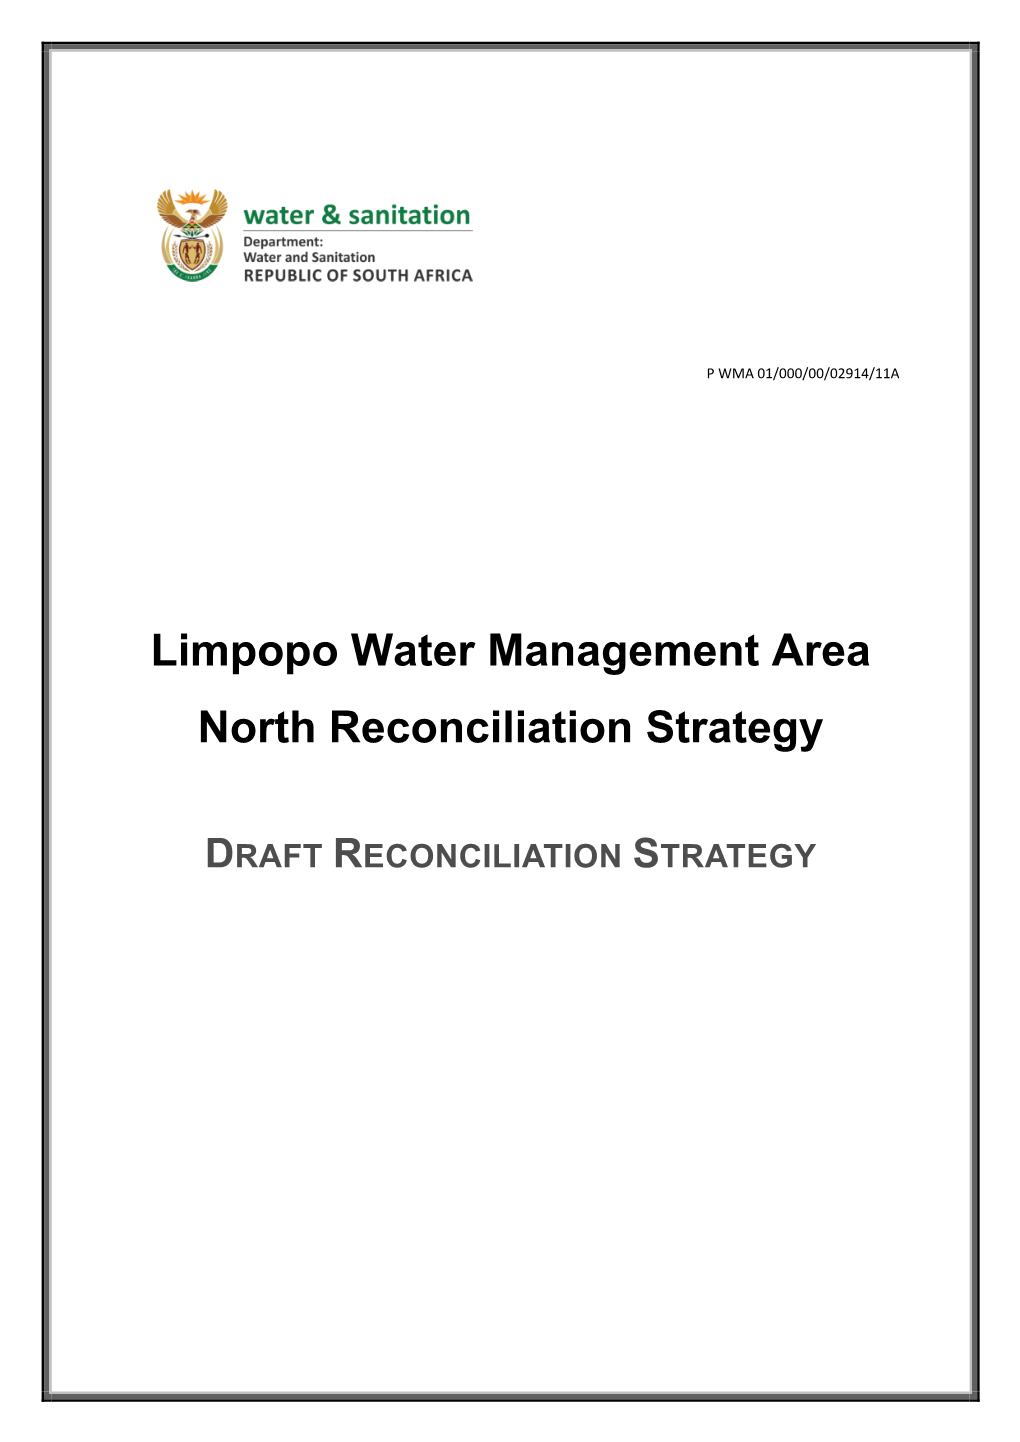 Limpopo Water Management Area North Reconciliation Strategy